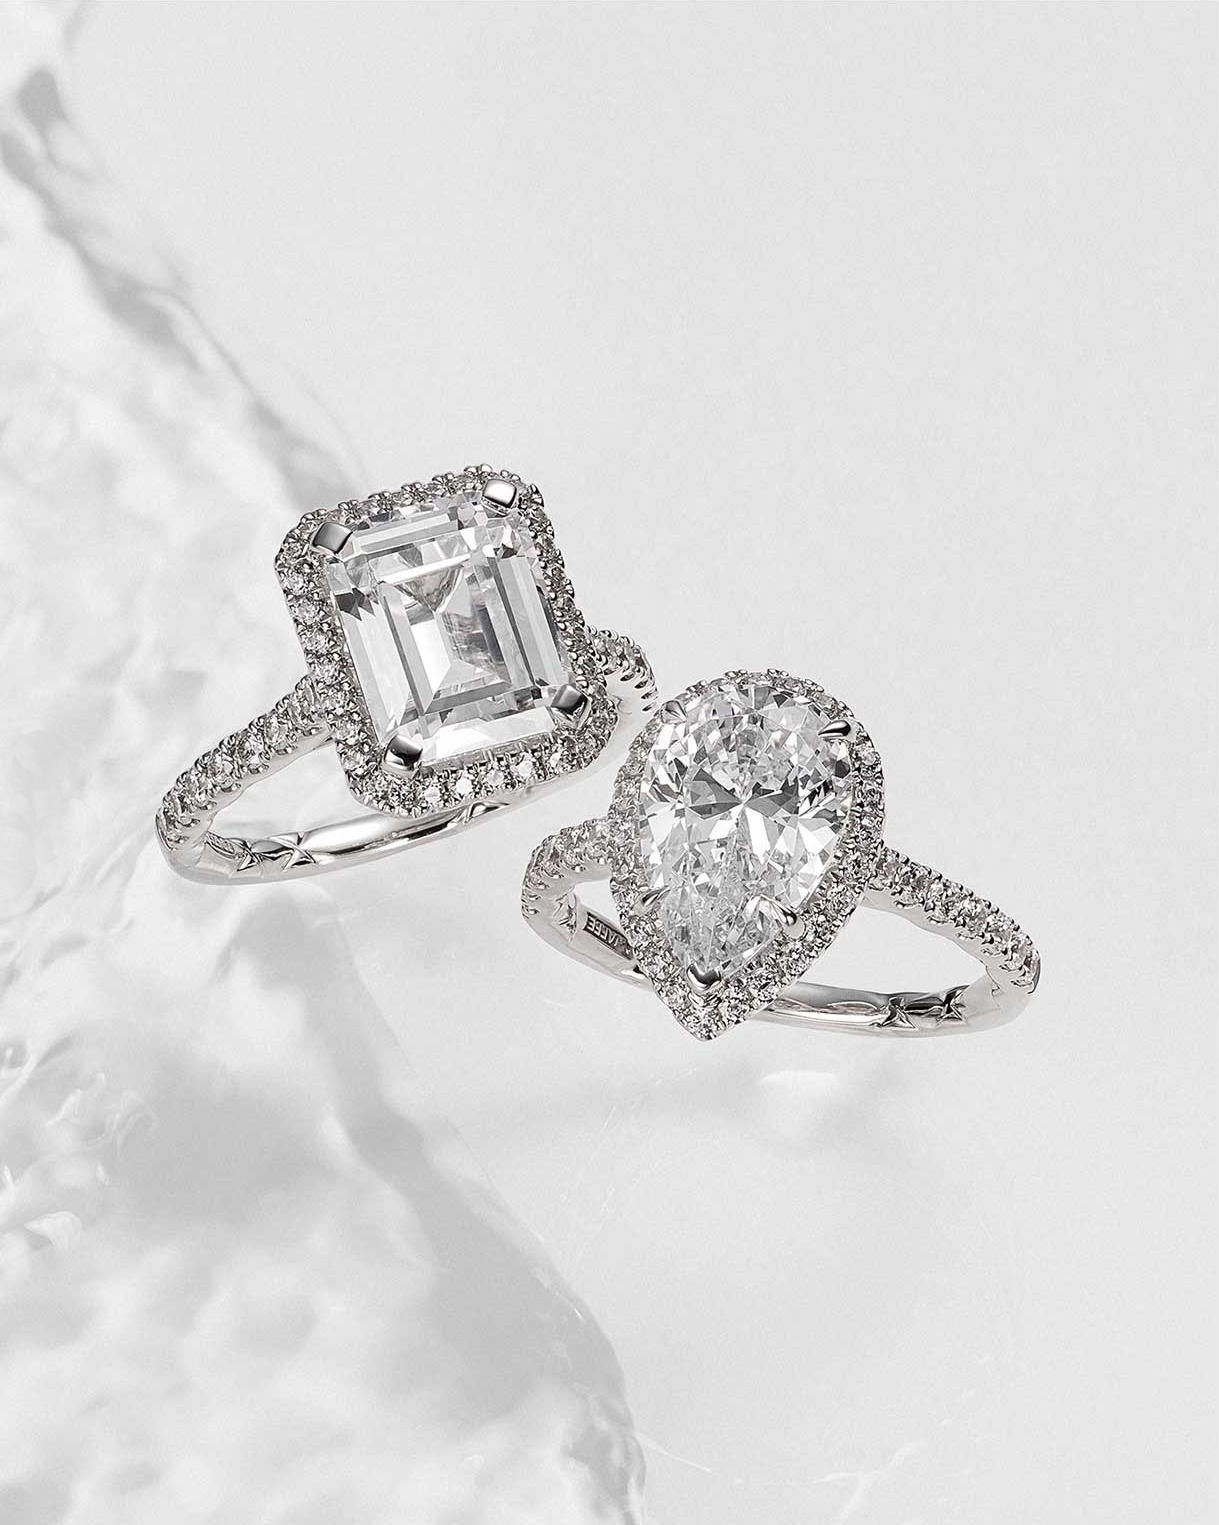 Designer Engagement Rings and fine jewelry